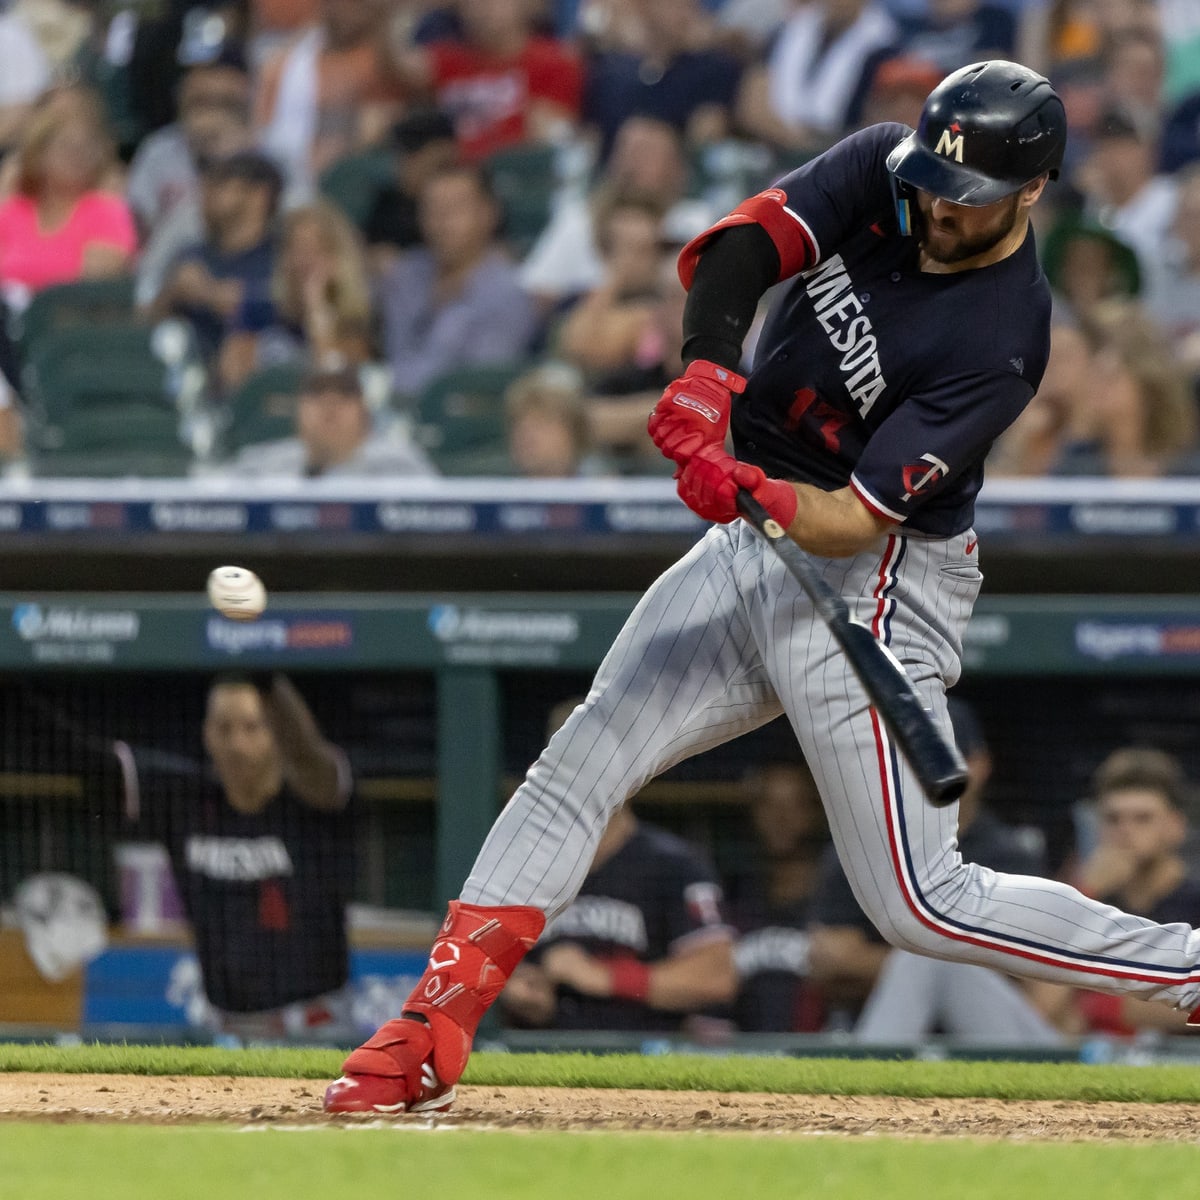 Trouble ahead for Twins? Can they score enough runs when pitching cools off?